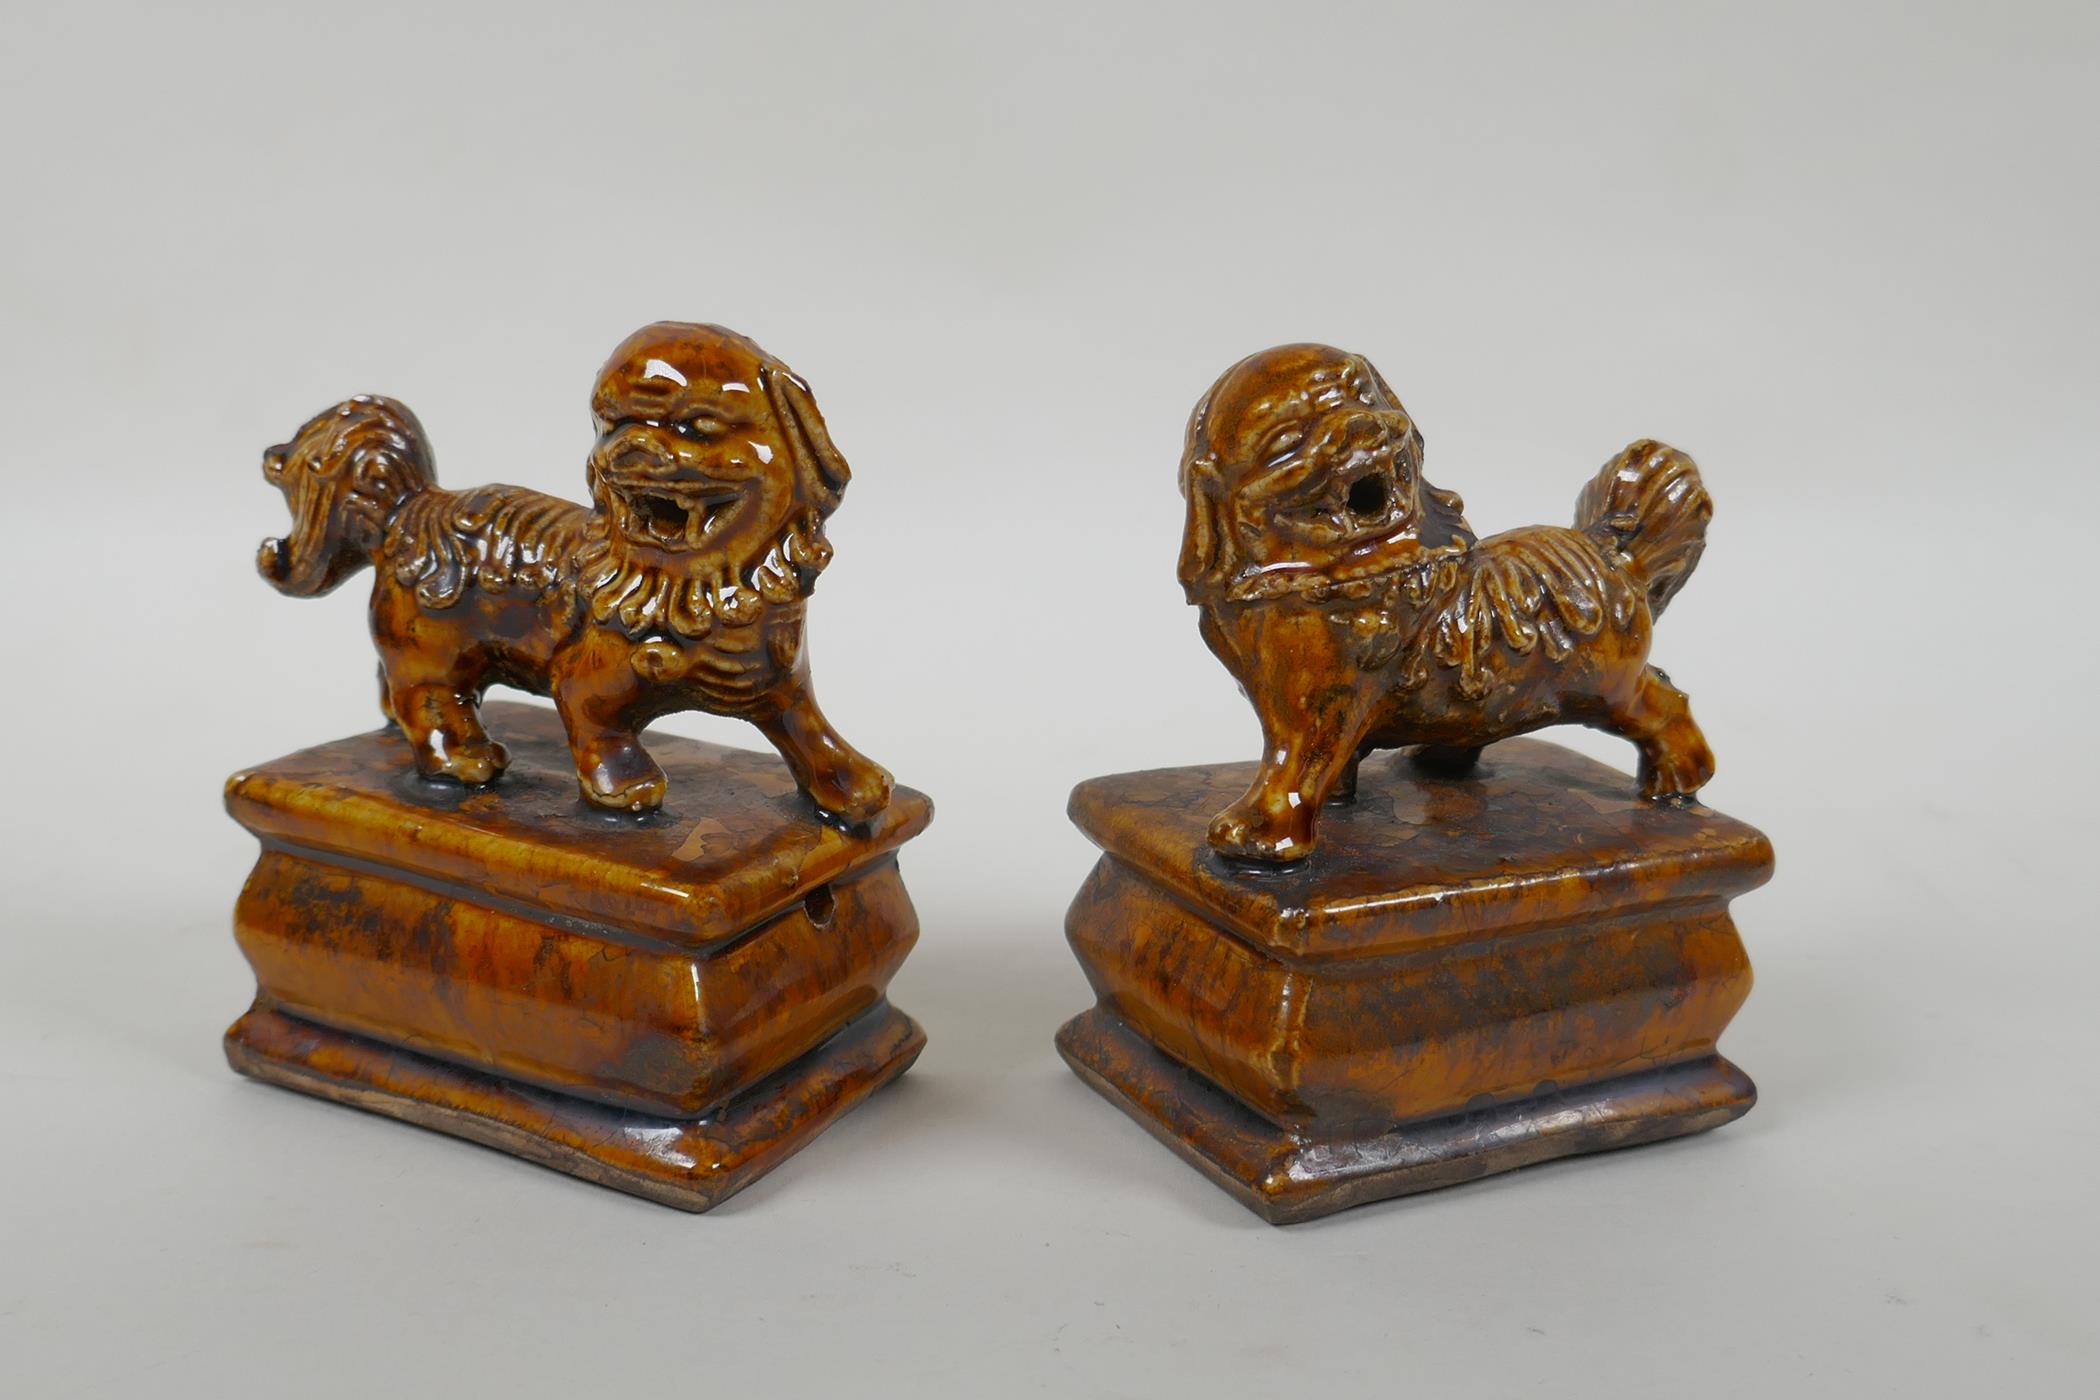 A pair of Chinese ochre glazed porcelain fo dogs, 10cm high